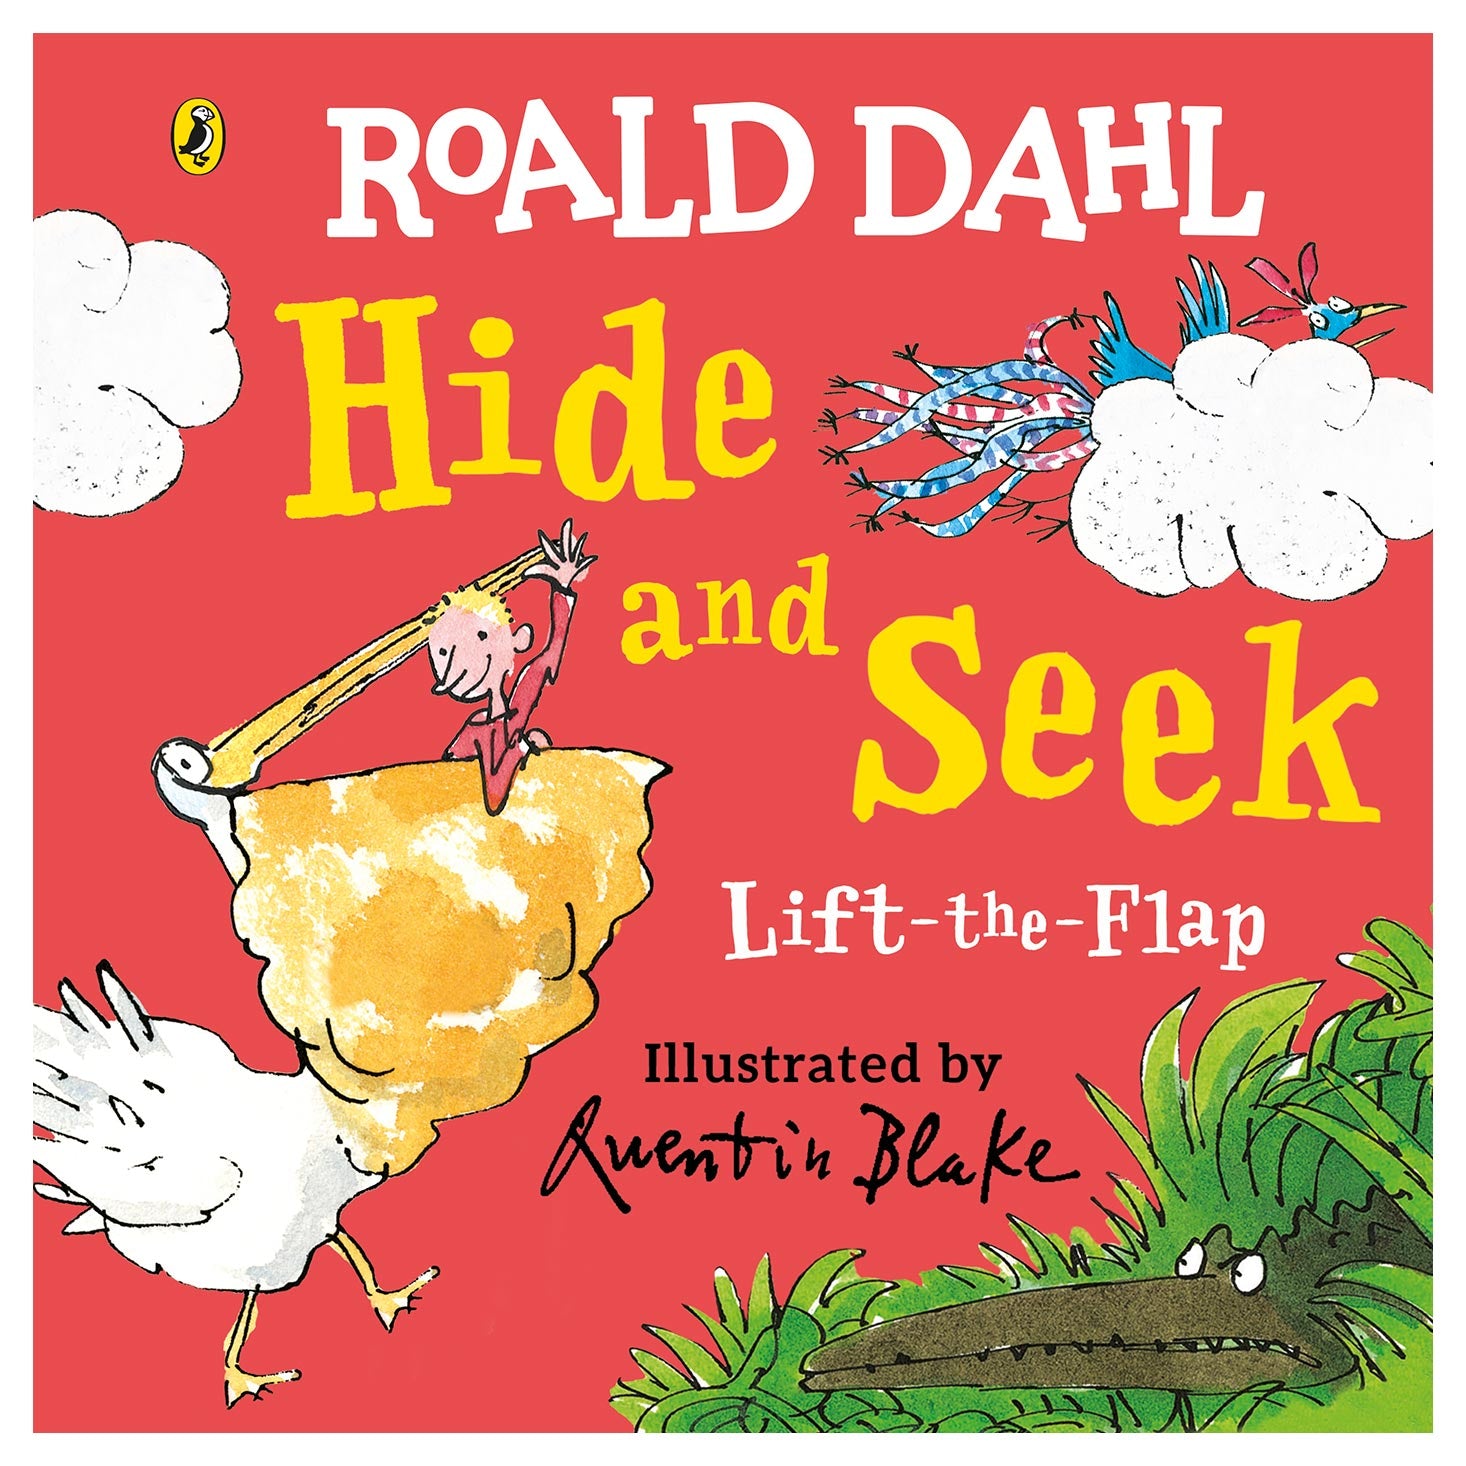 Hide and Seek board book based on Roald Dahl stories with Quentin Blake illustrations